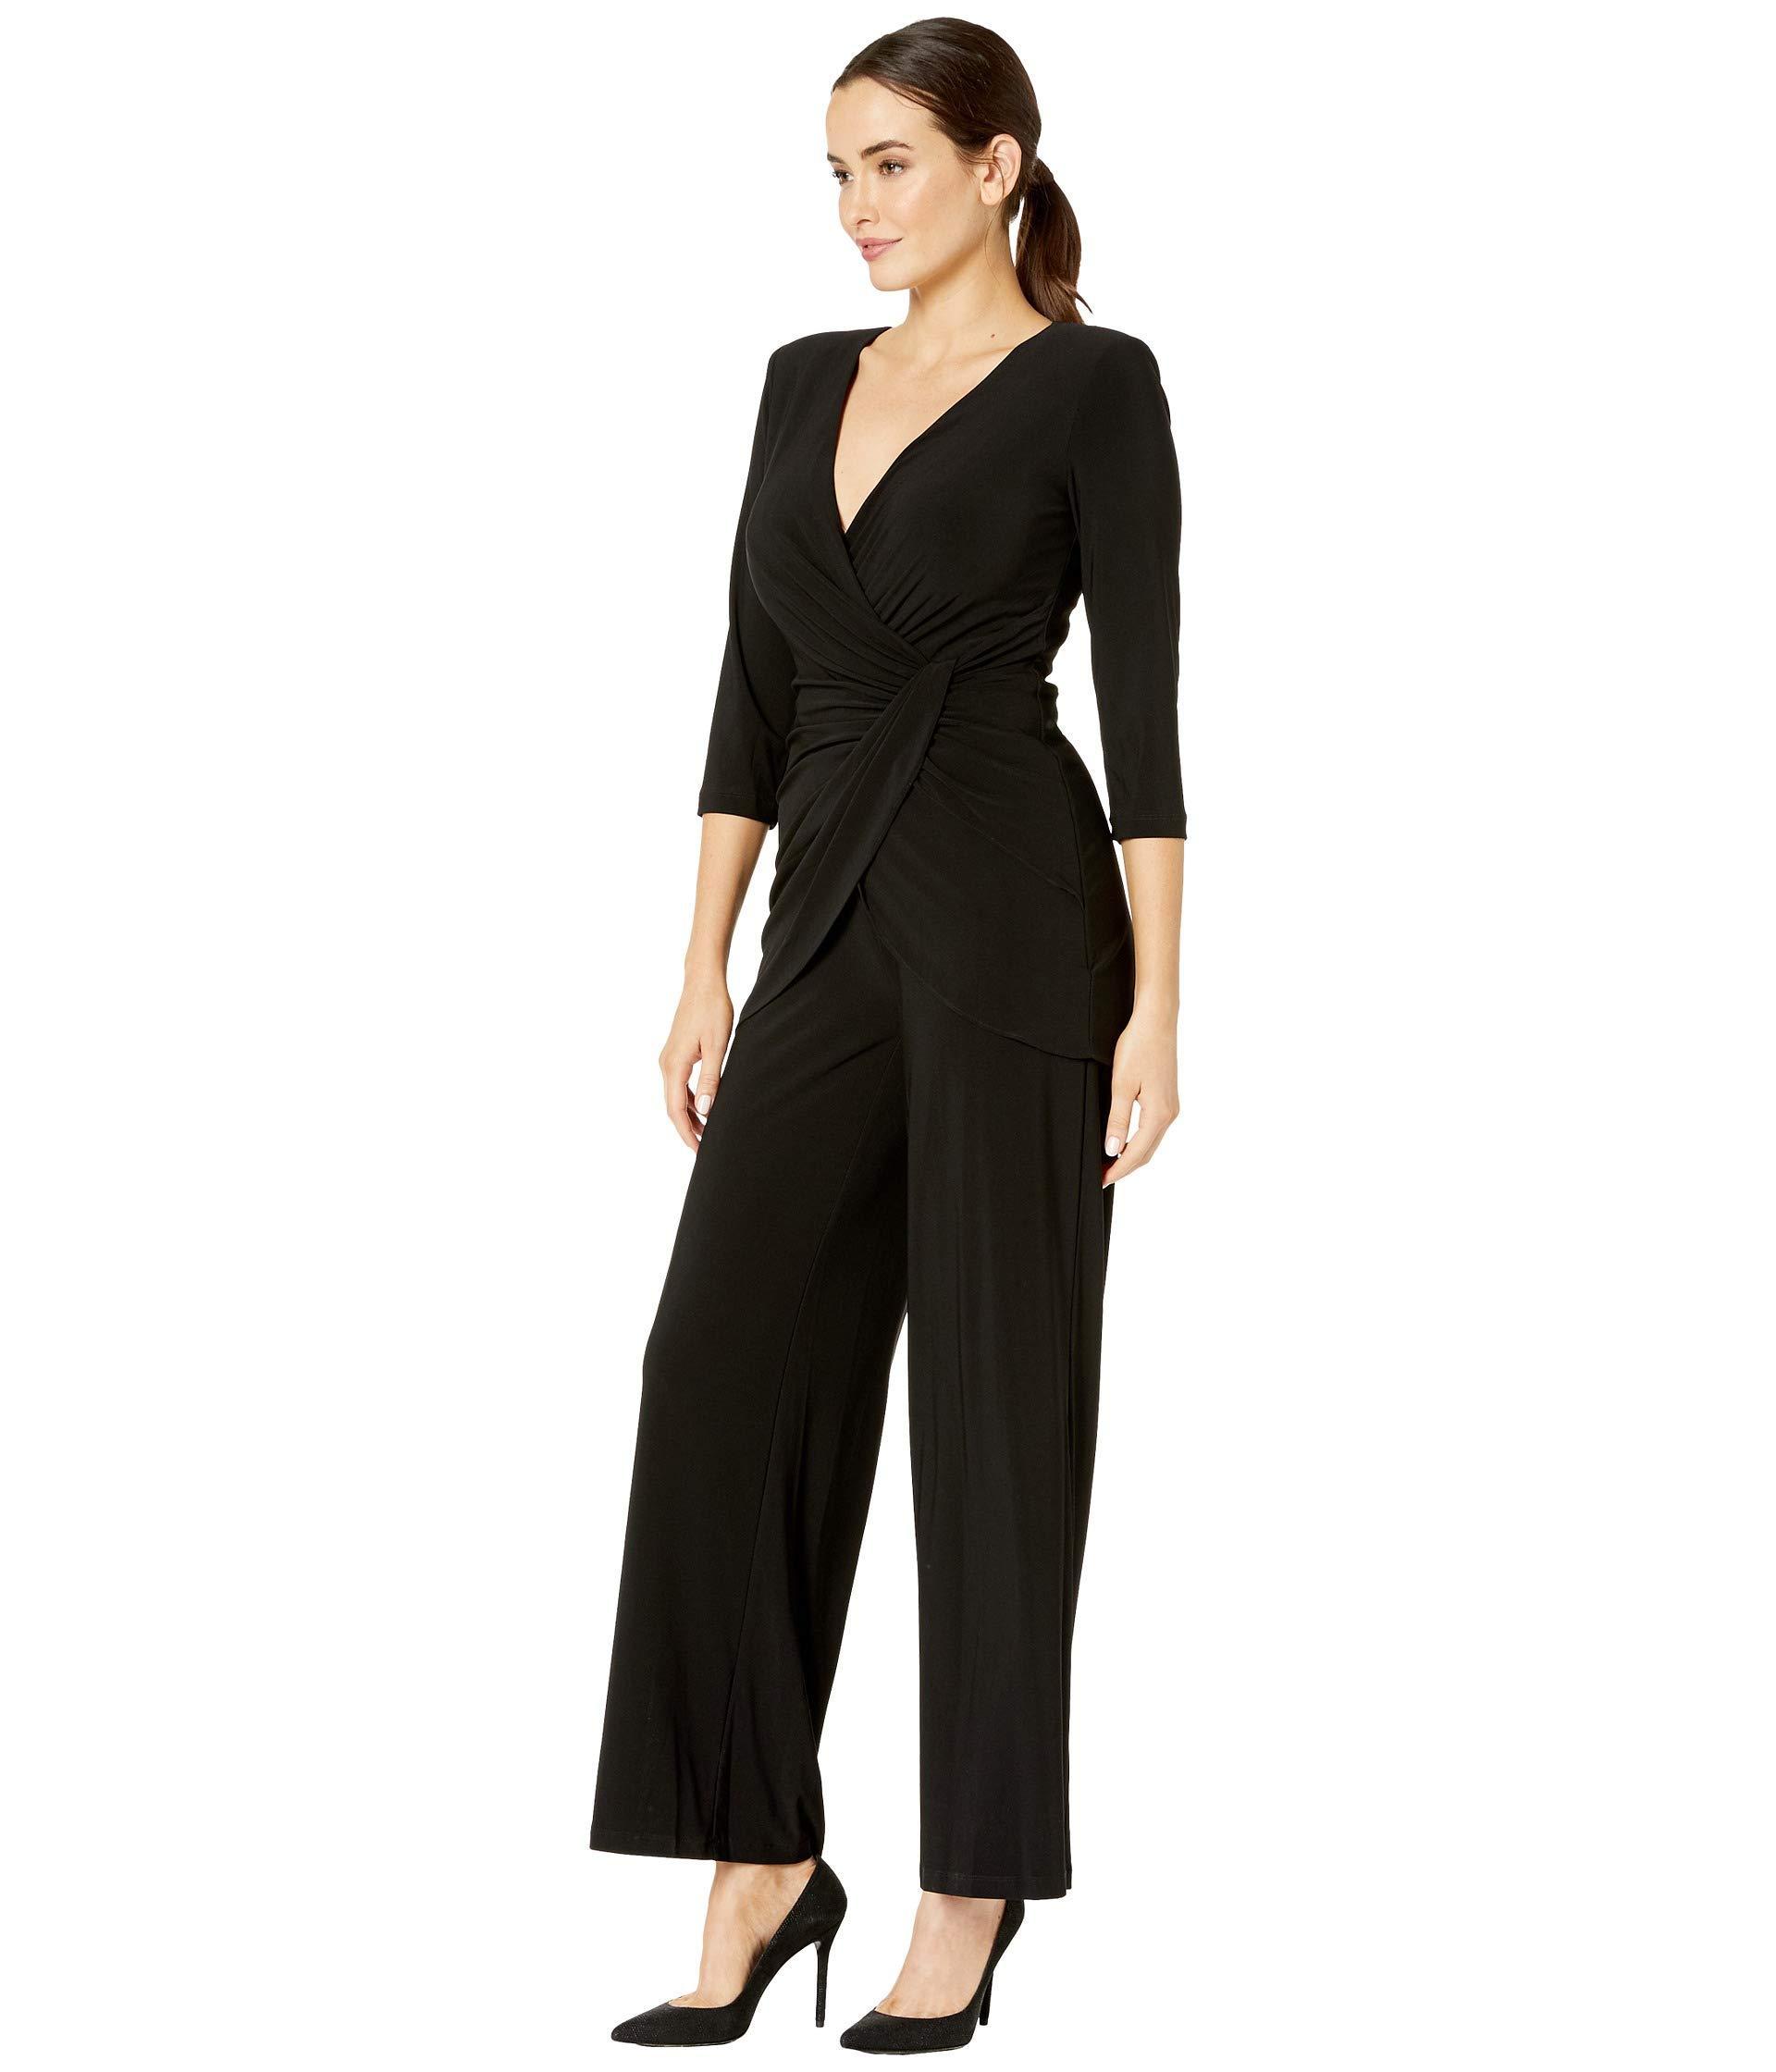 Adrianna Papell Synthetic Jersey Long Sleeve Jumpsuit in Black - Lyst